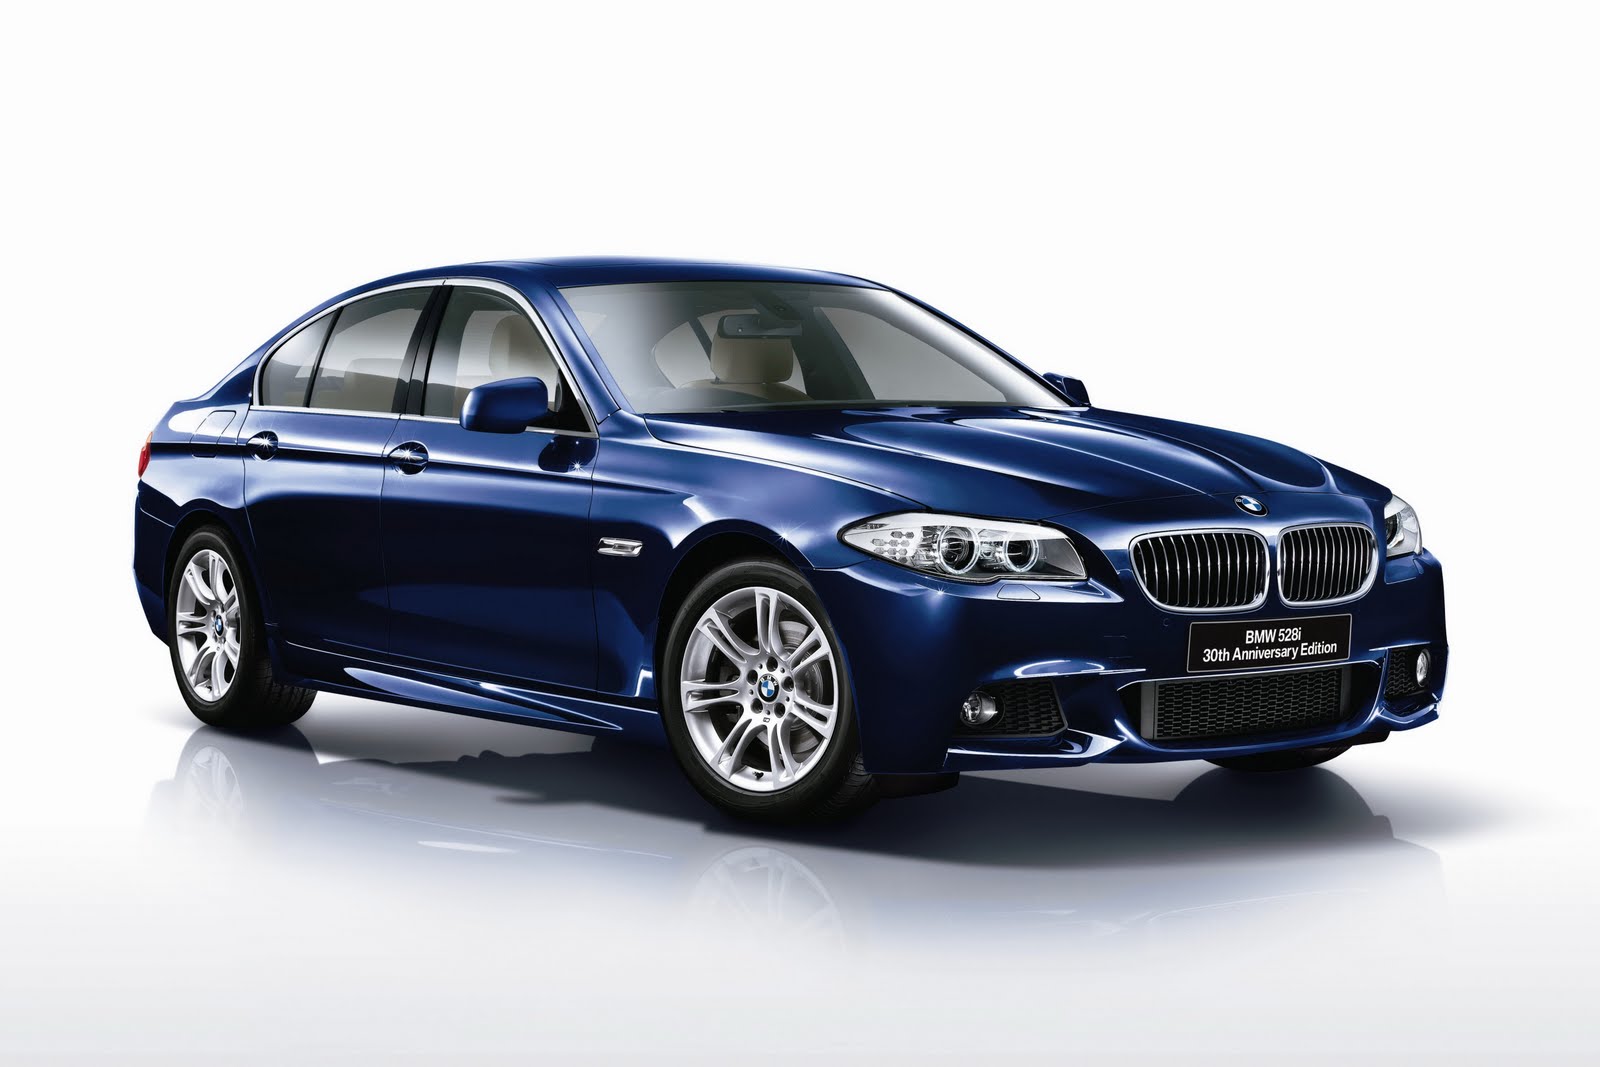 Yesterday we had the all new BMW 528i 2 0 Twin Power Turbo 245 bhp